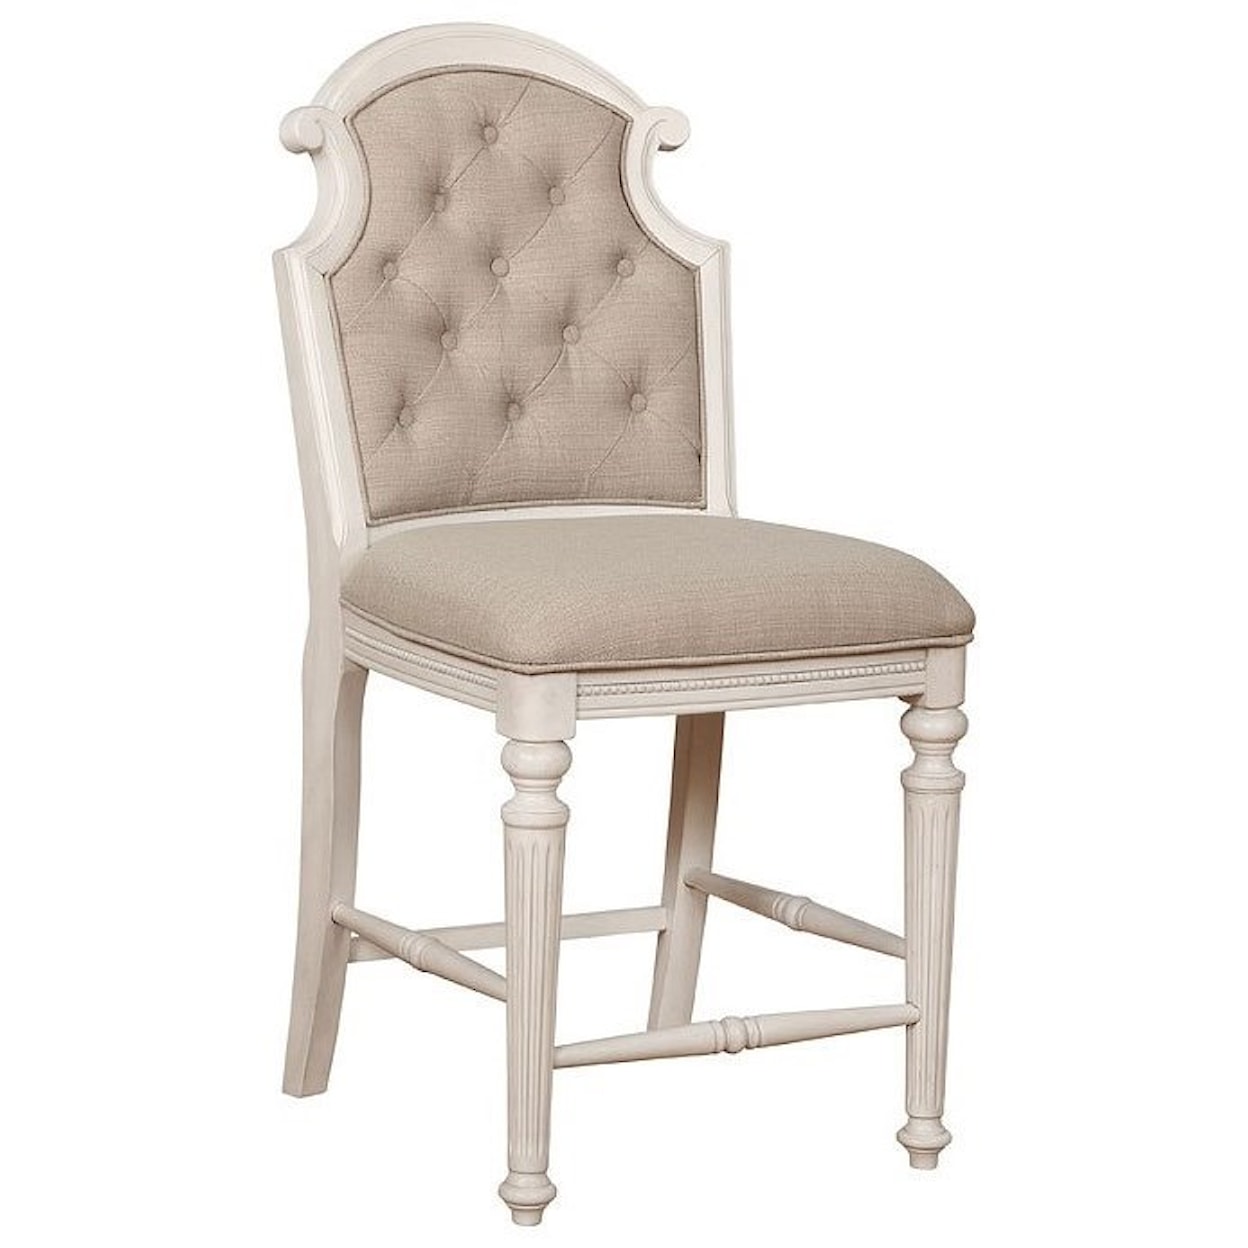 Avalon Furniture West Chester Gathering Chair